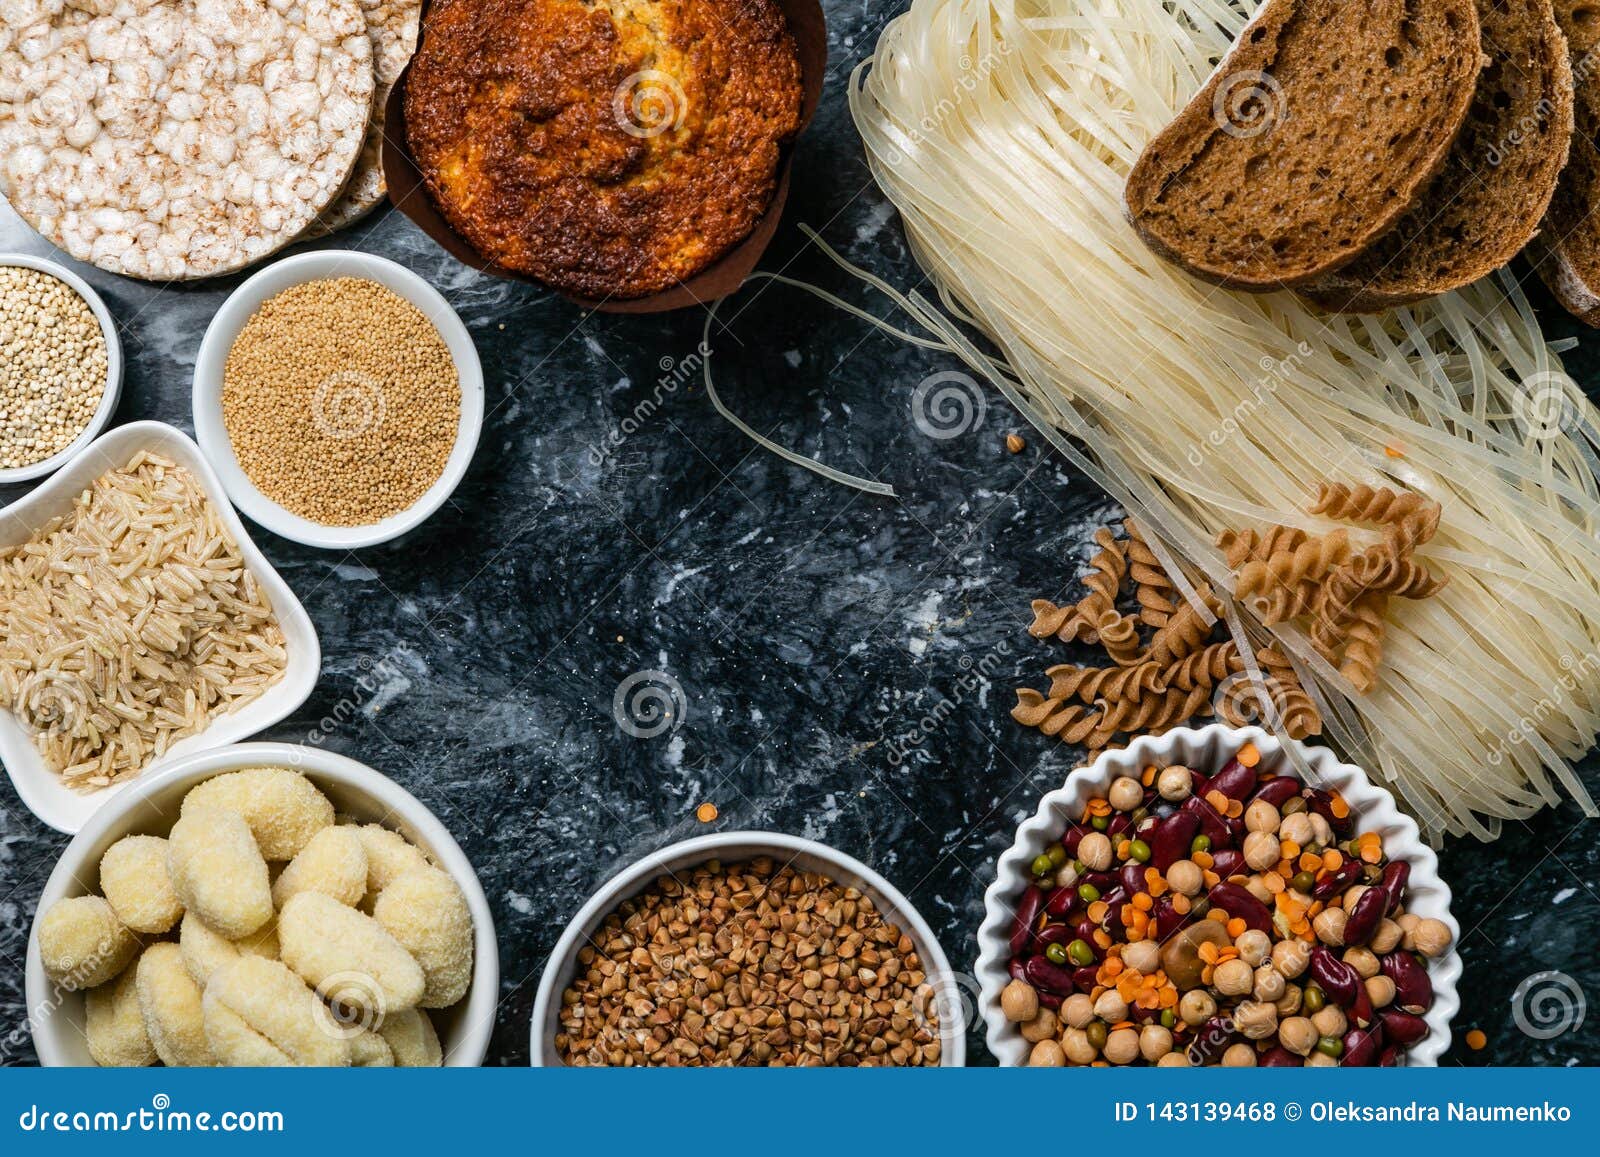 Gluten Free Diet Concept - Selection of Grains and Carbohydrates for ...